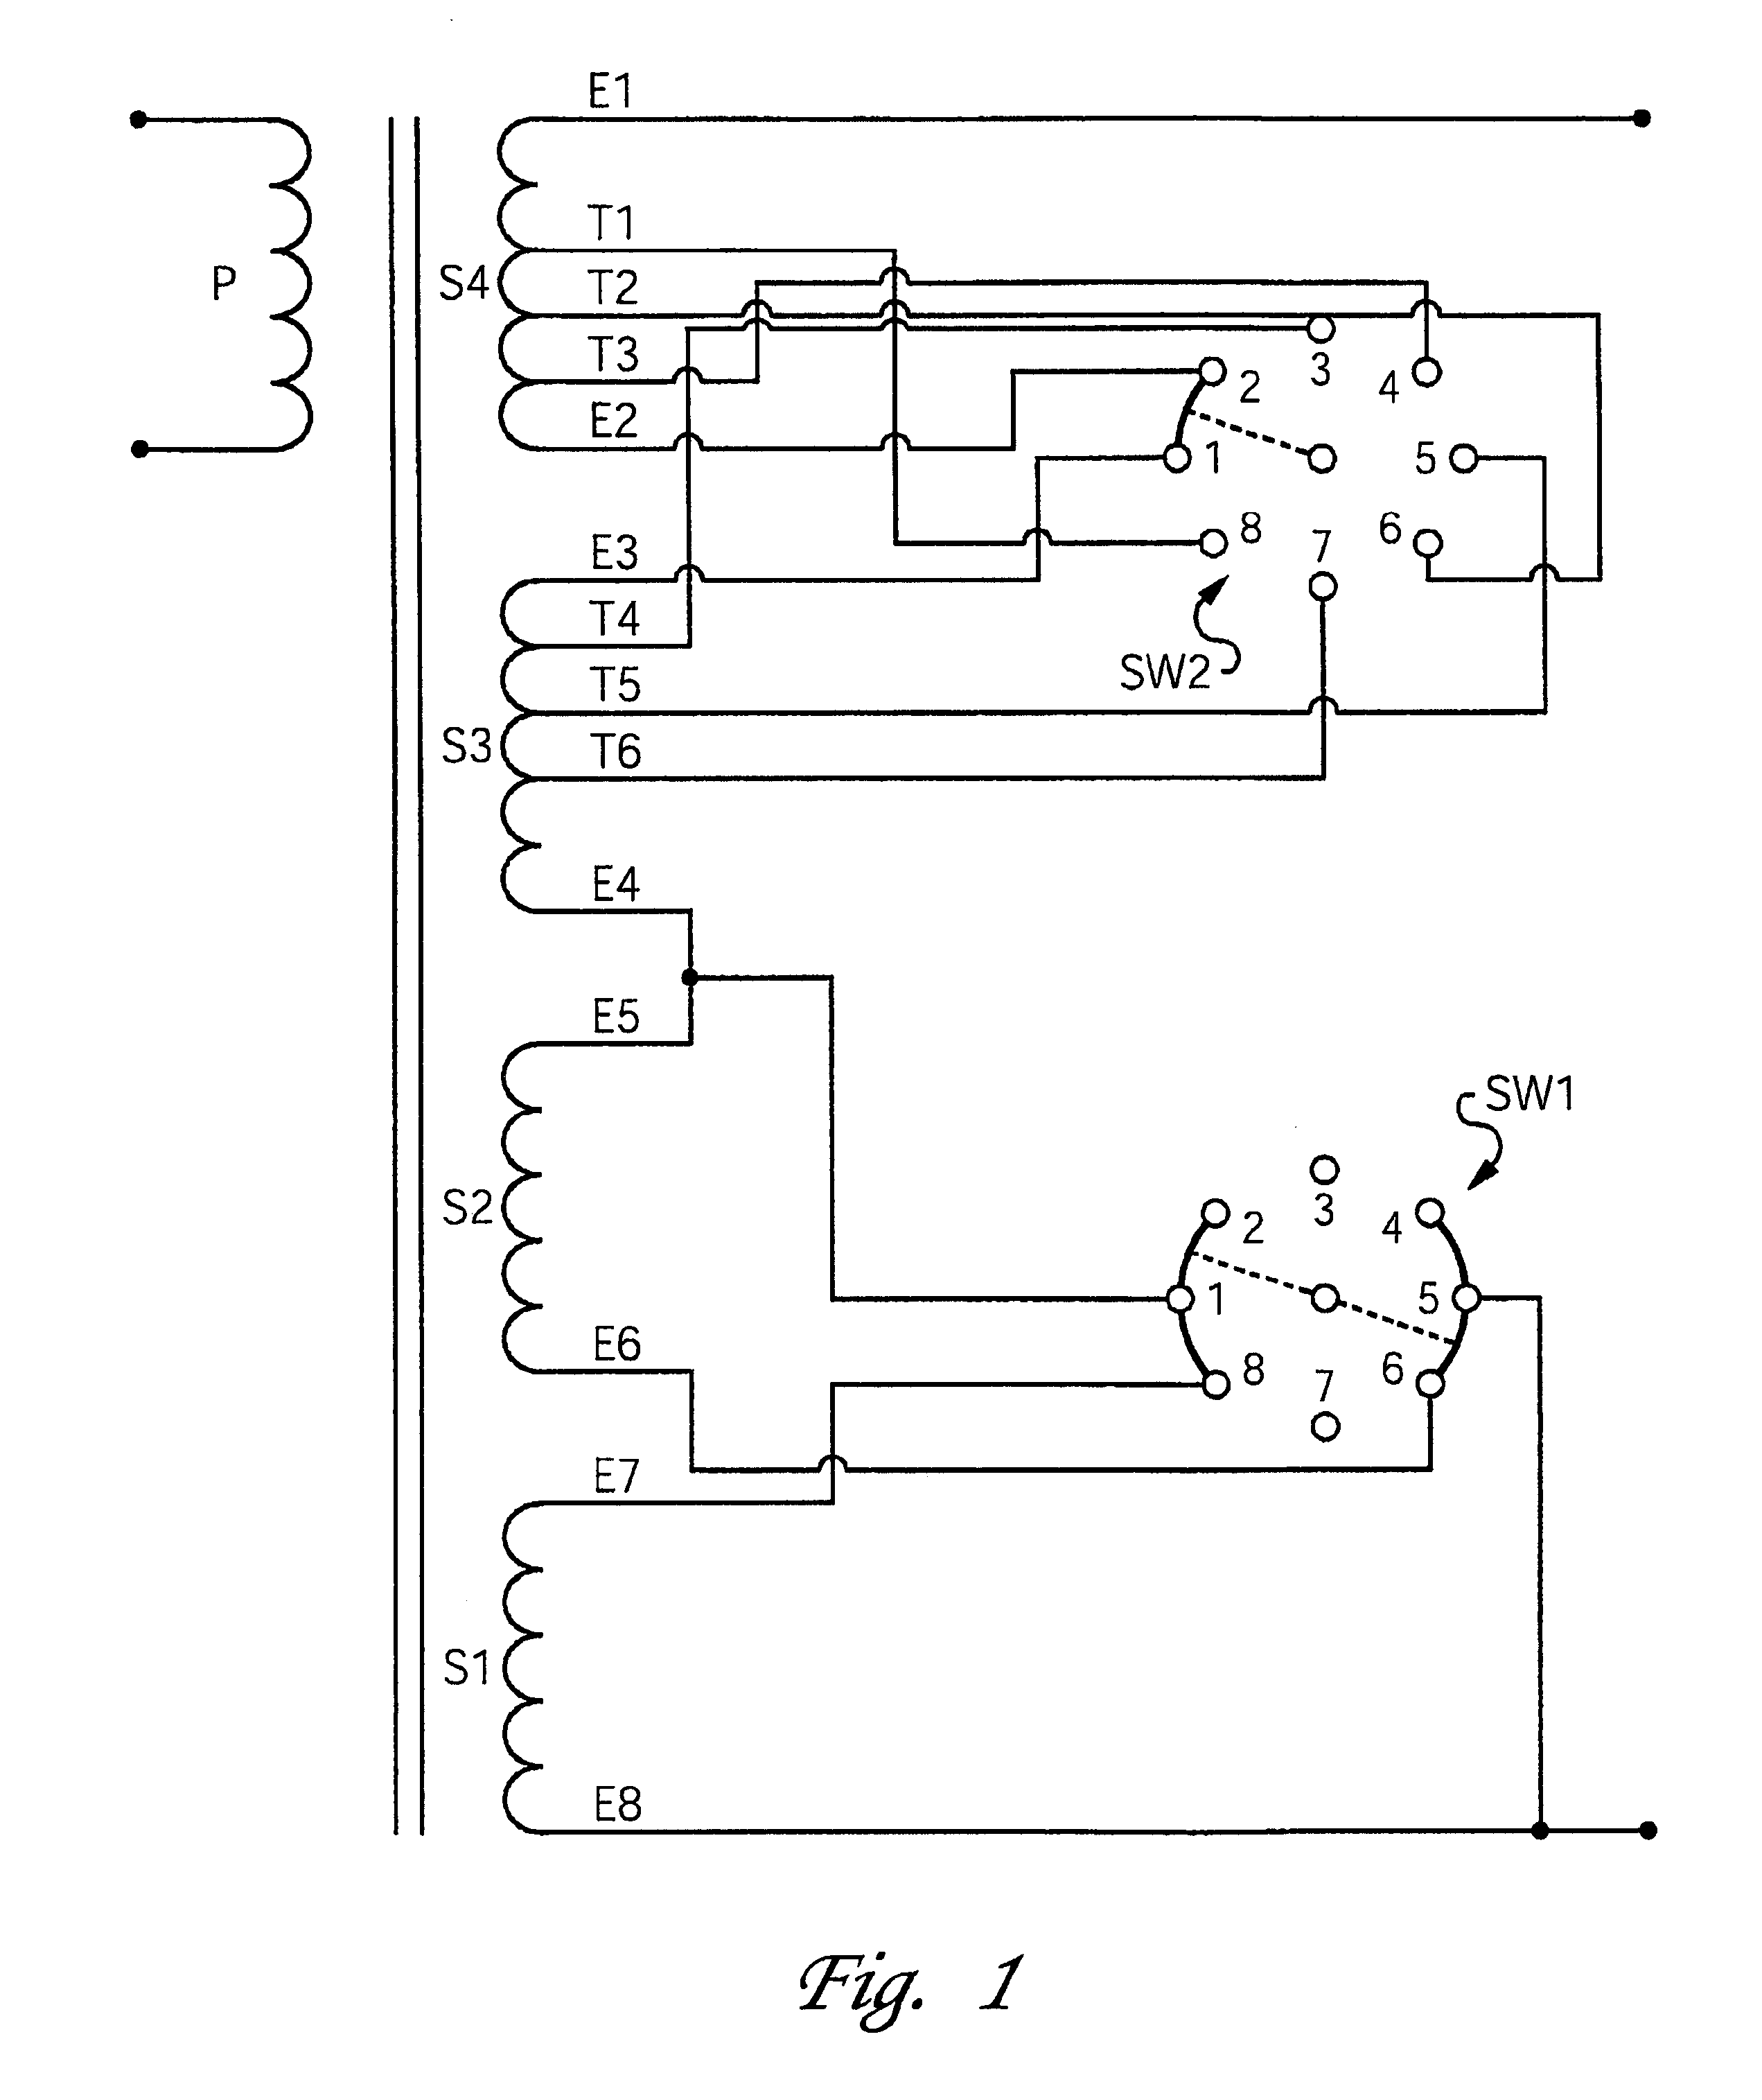 Method and apparatus for providing selectable output voltages